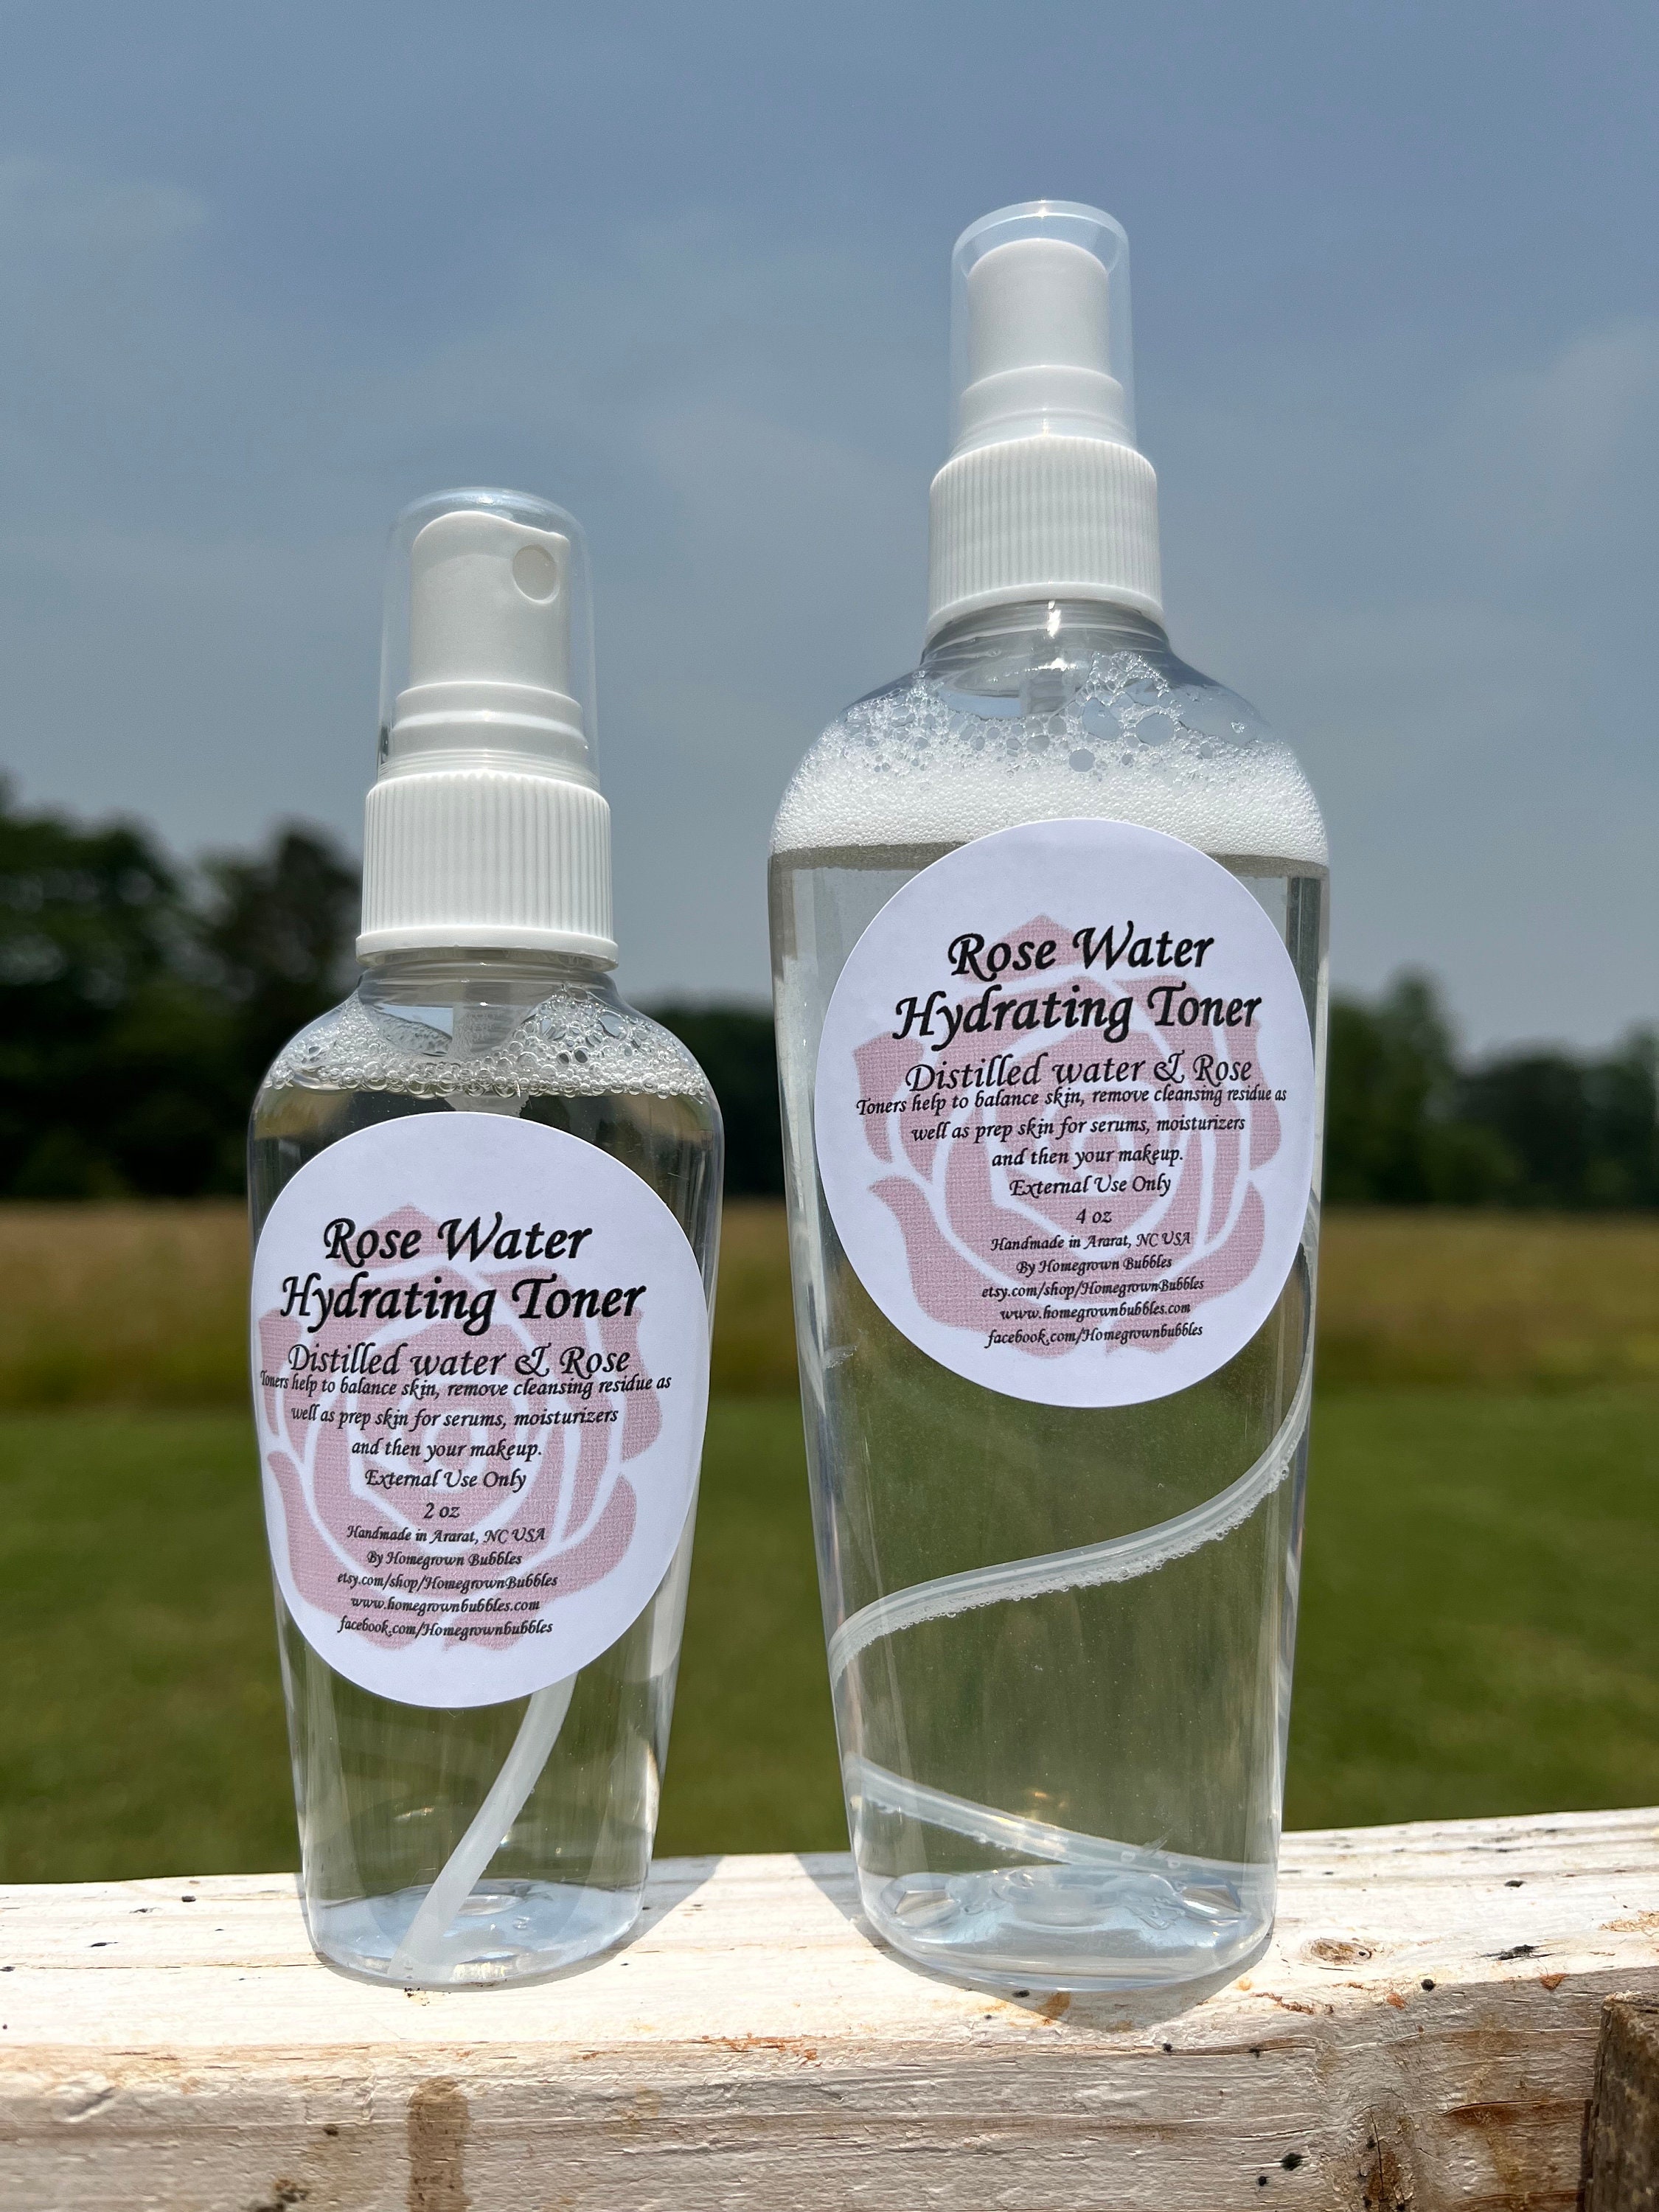 2 Oz and 4 Oz Rose Water Hydrating Toner